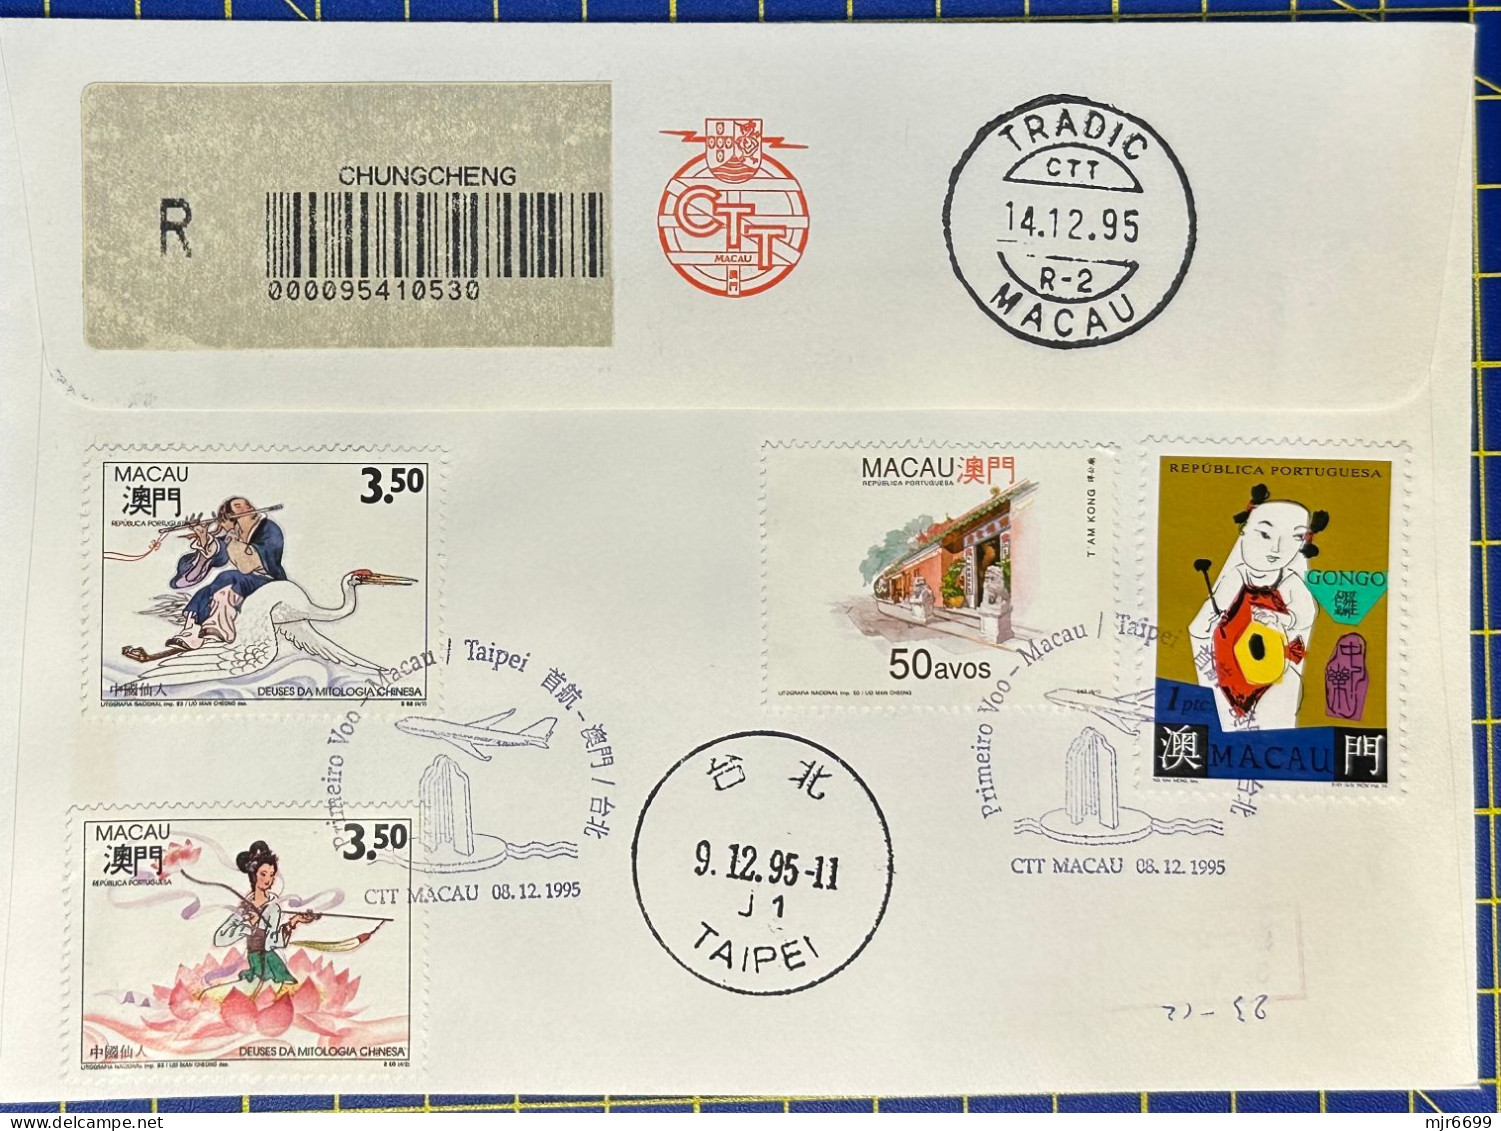 1995 MACAU INTER. AIRPORT FIRST FLIGHT COVER TO TAIPEI, TAIWAN - Lettres & Documents